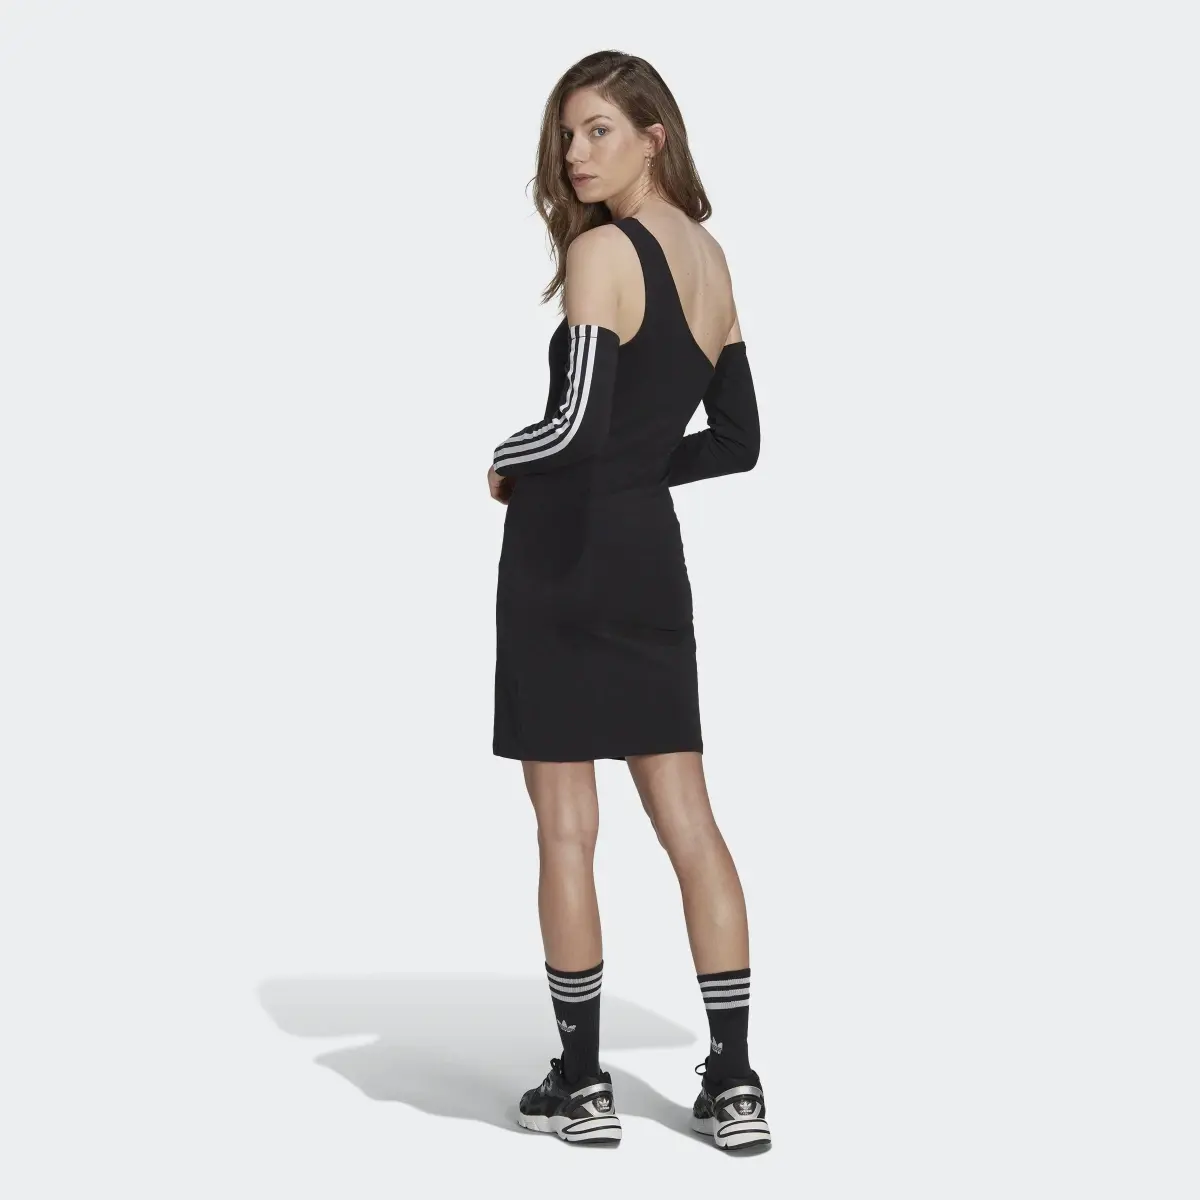 Adidas Centre Stage Cutout Long Sleeve Dress. 3